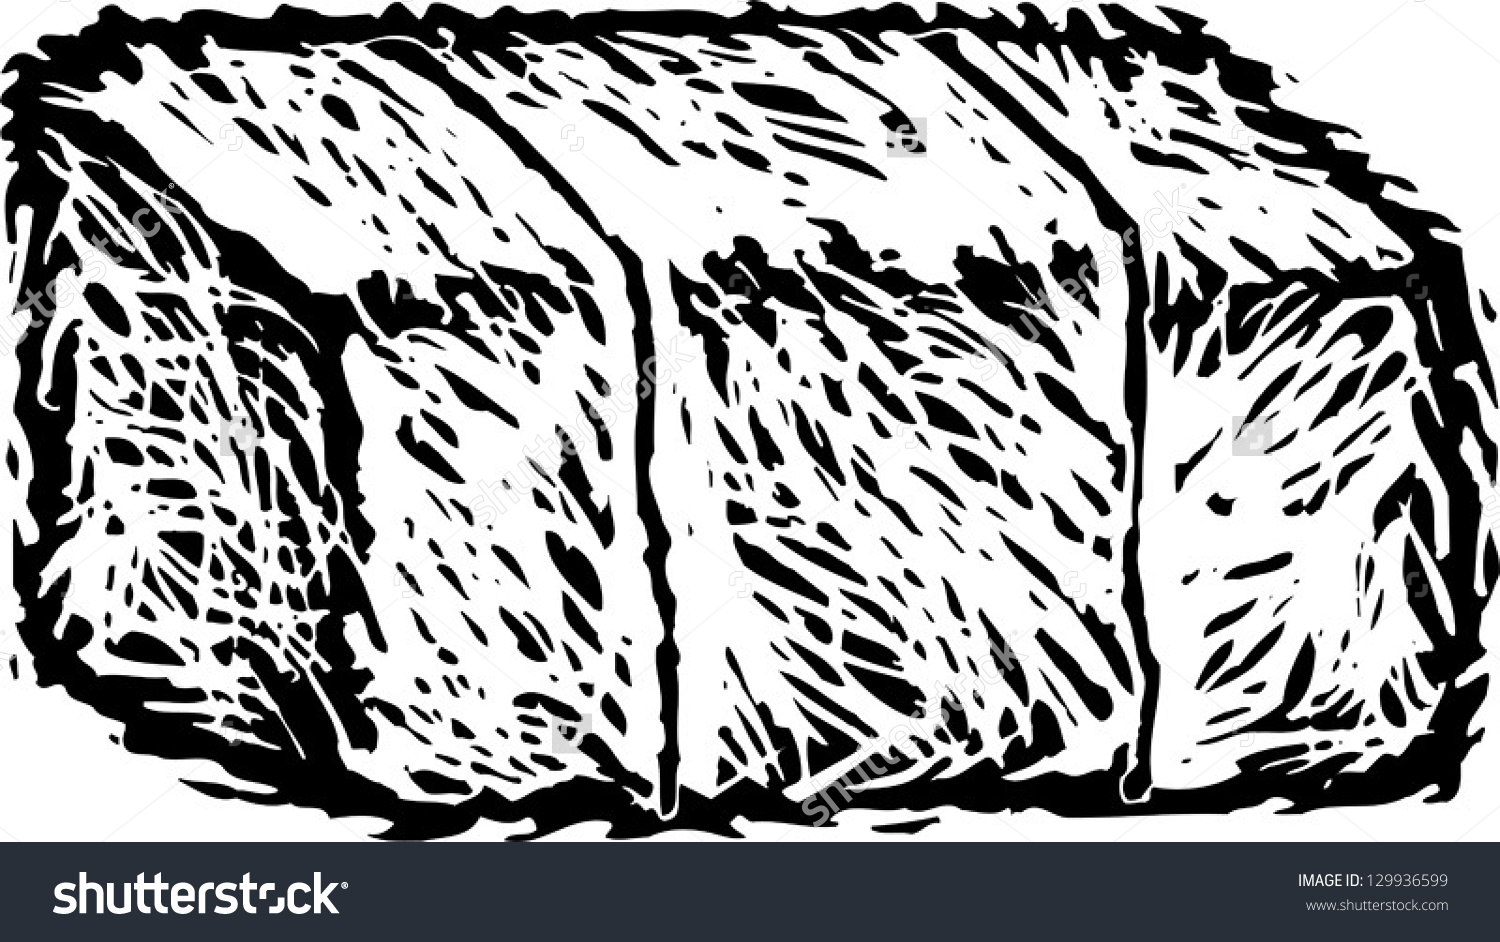 Hay clipart black and white 